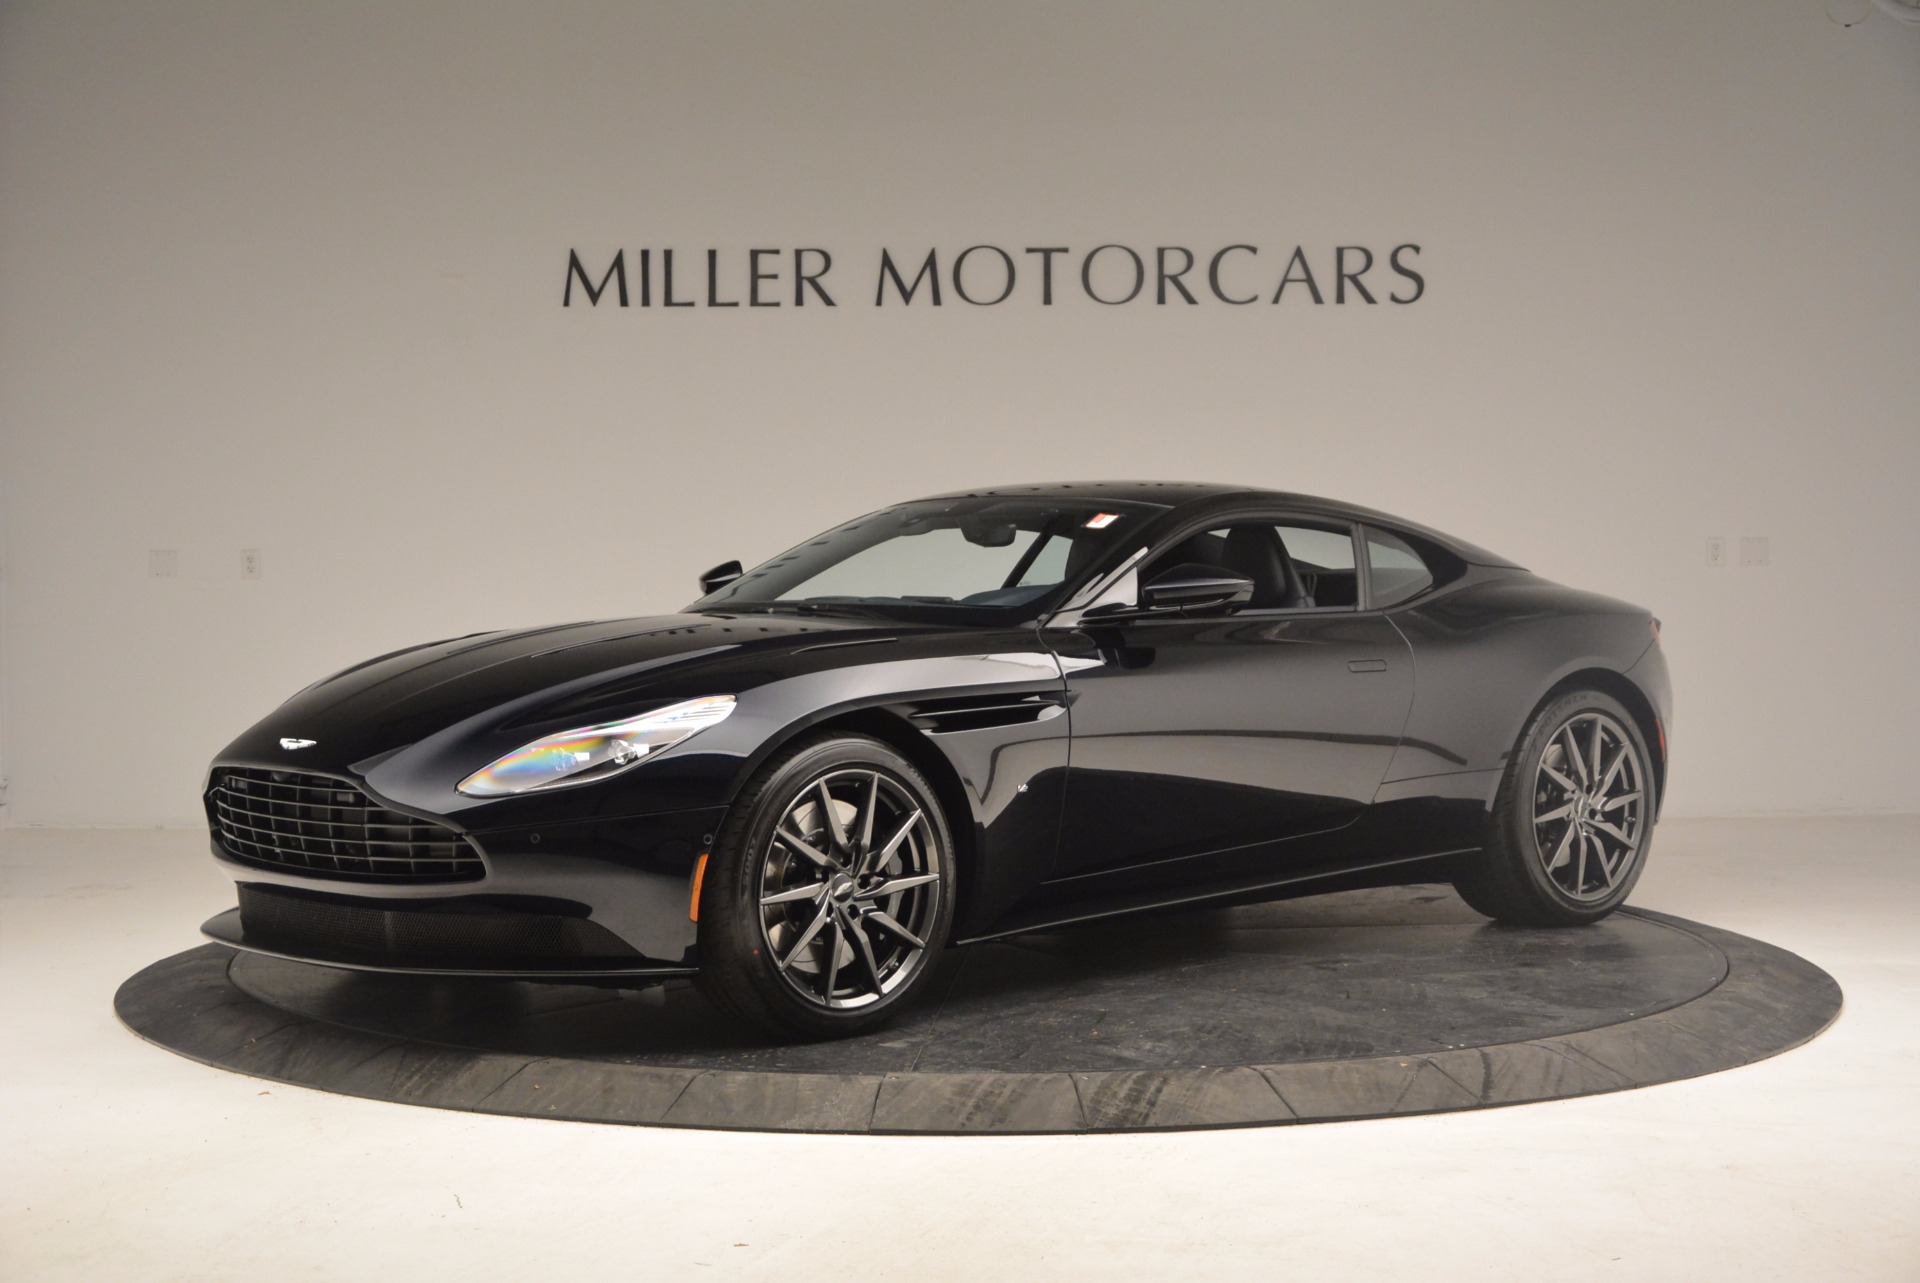 Used 2017 Aston Martin DB11 V12 Coupe for sale Sold at McLaren Greenwich in Greenwich CT 06830 1